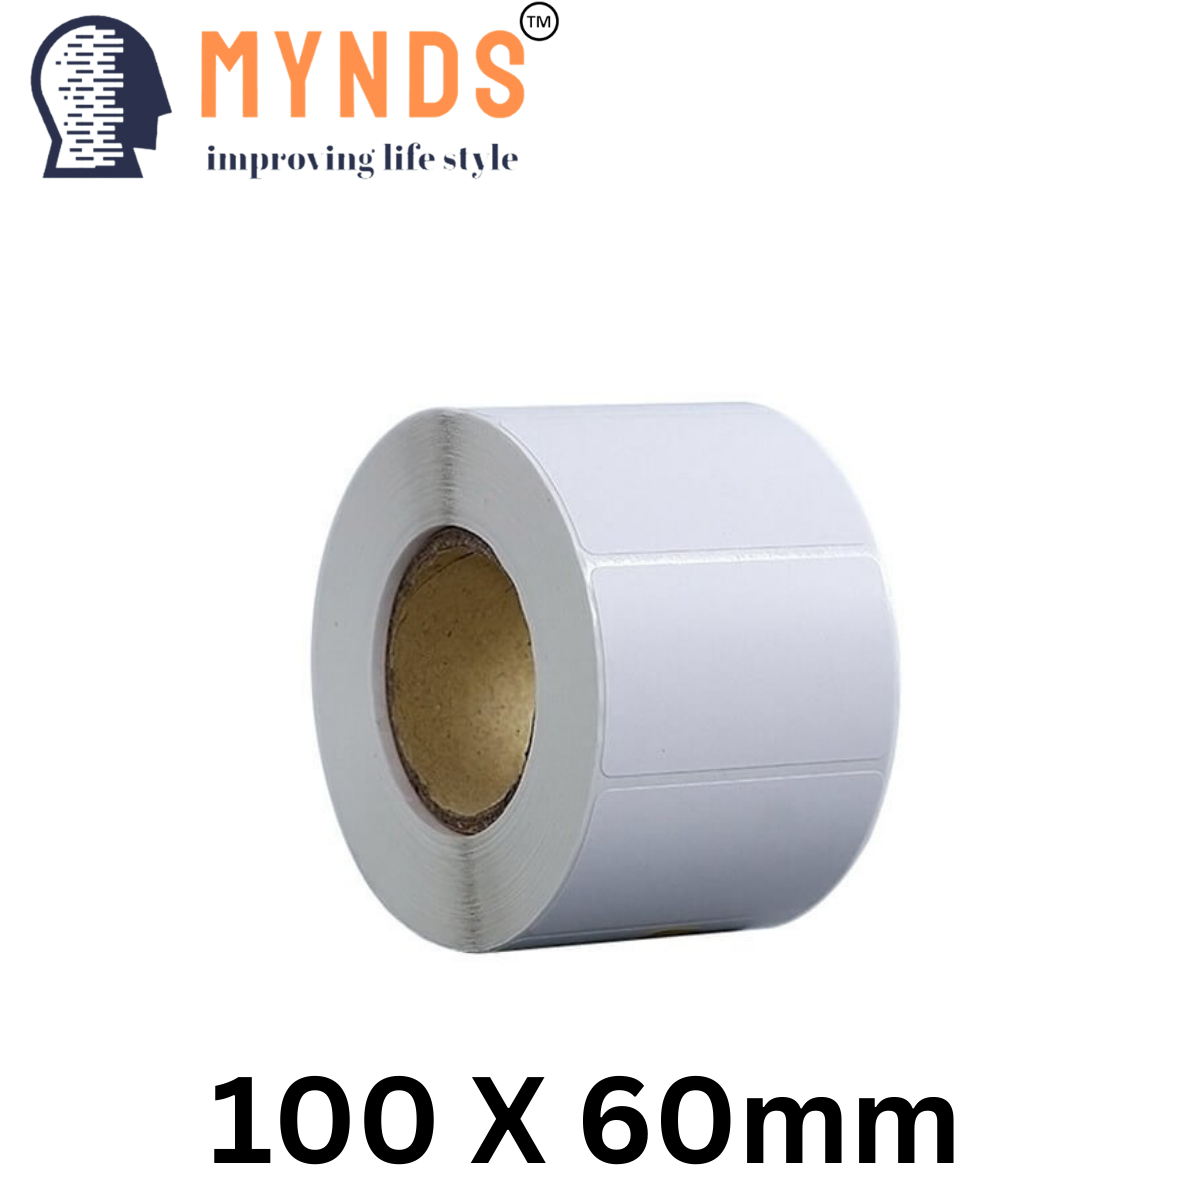 100 x 60mm Direct Thermal Label